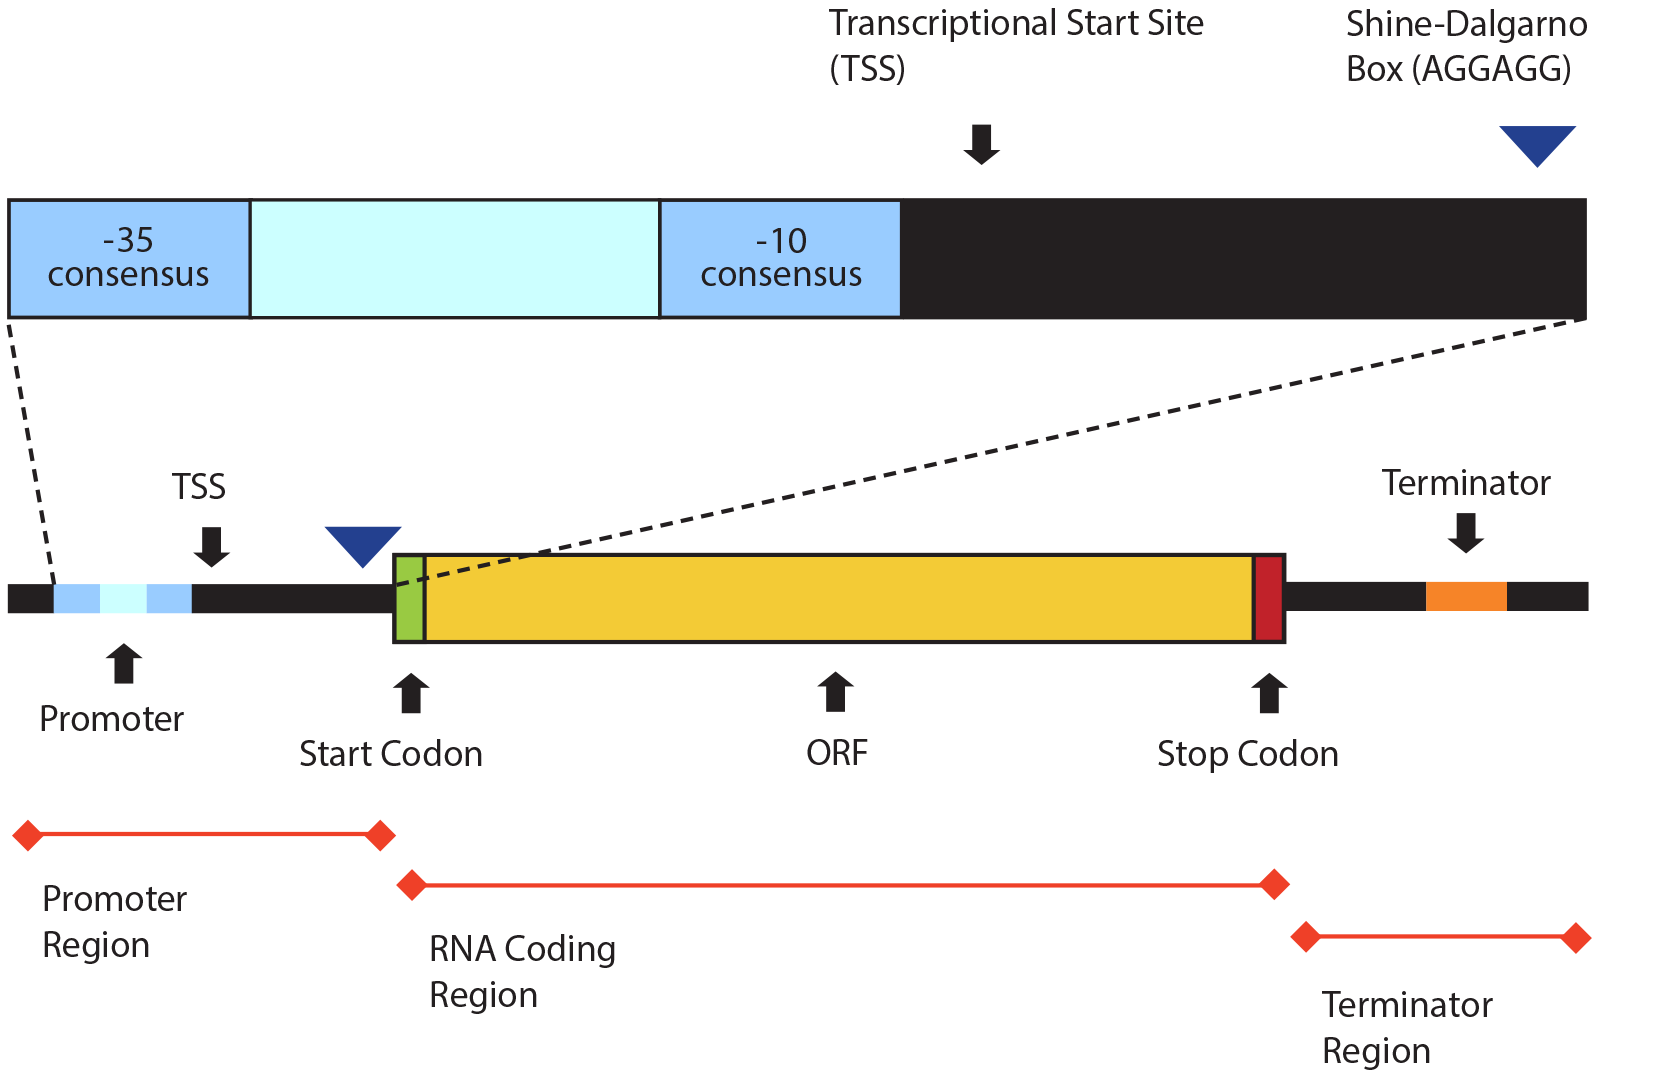 A more detailed illustration of the gene structure with the promoter region expanded to show the blue stripes as negative 35 consensus and negative 10 consensus and the black area next to the blue stripes as the transcriptional start site and the end of the black area as the shine-dalgarno box with sequence A-G-G-A-G-G. The yellow oblong shape labeled O-R-F is has a green stripe on the left labeled start codon and a red stripe on the right labeled stop codon. The orange stripe in the black section to the right of the O-R-F is labeled terminator.